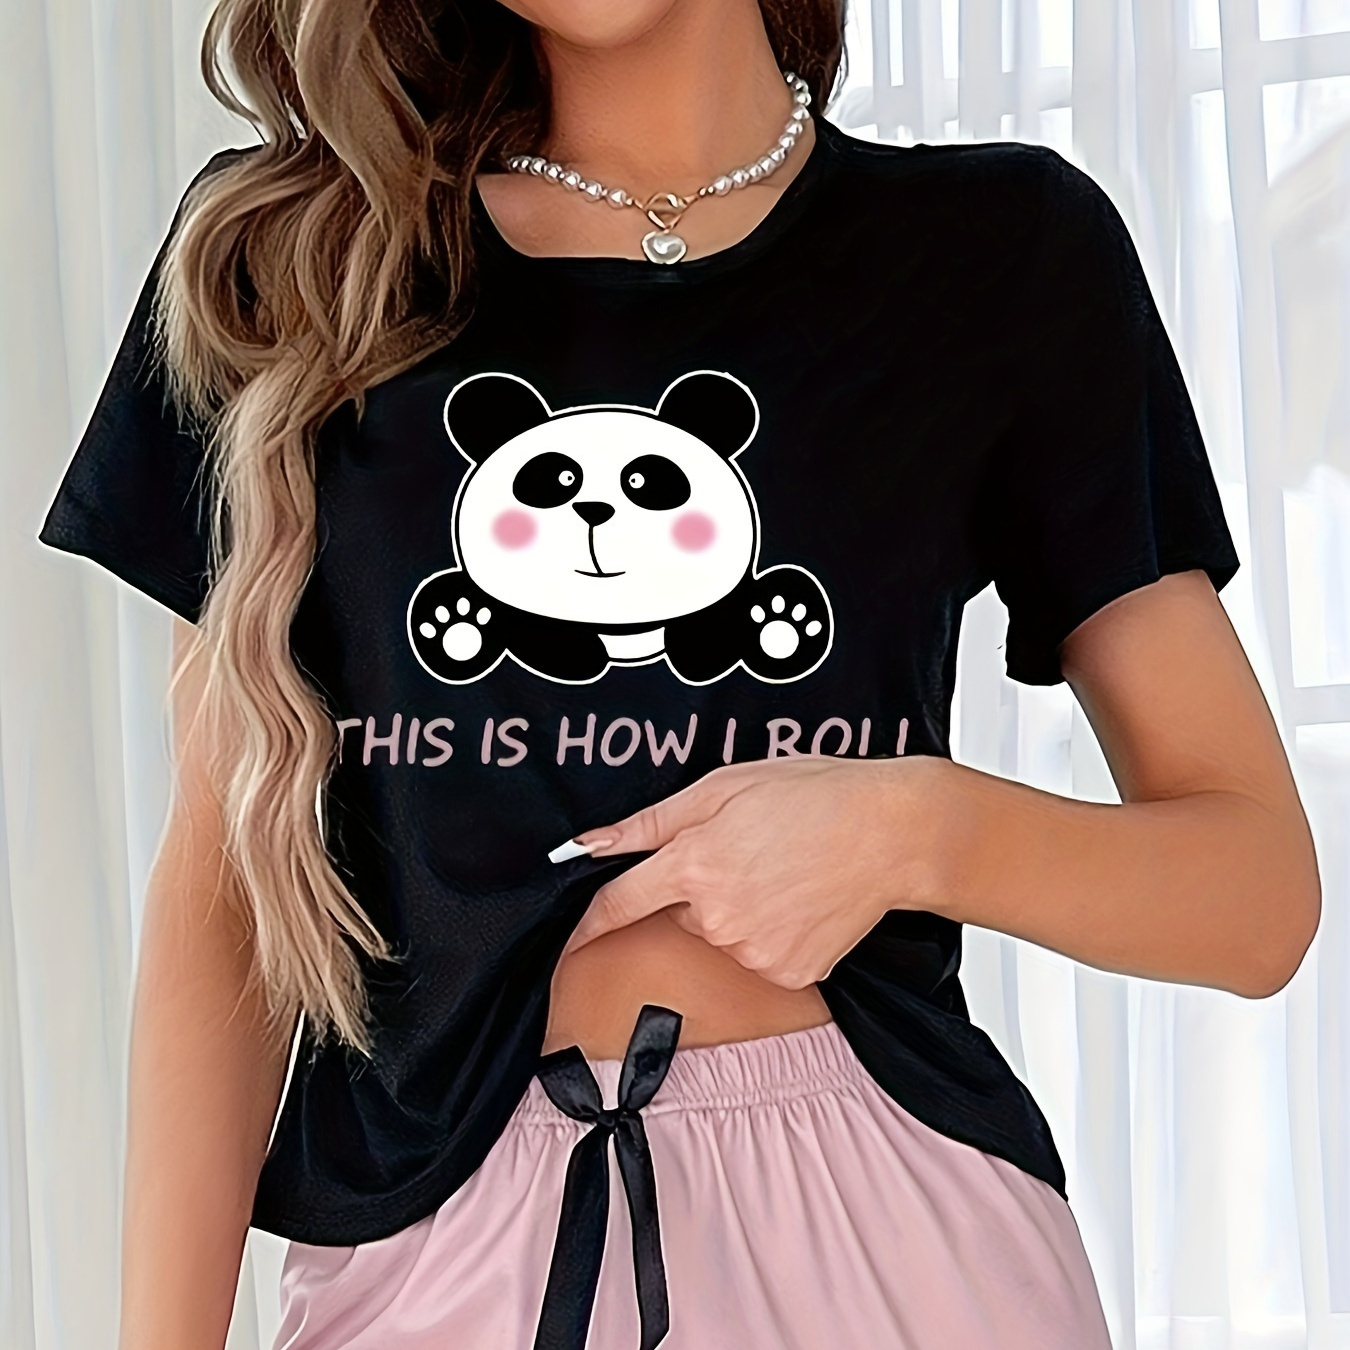 

Women's Casual Tee With Cute Panda Graphic And Slogan, Short Sleeve, Round Neck Shirt For Sleep Wear